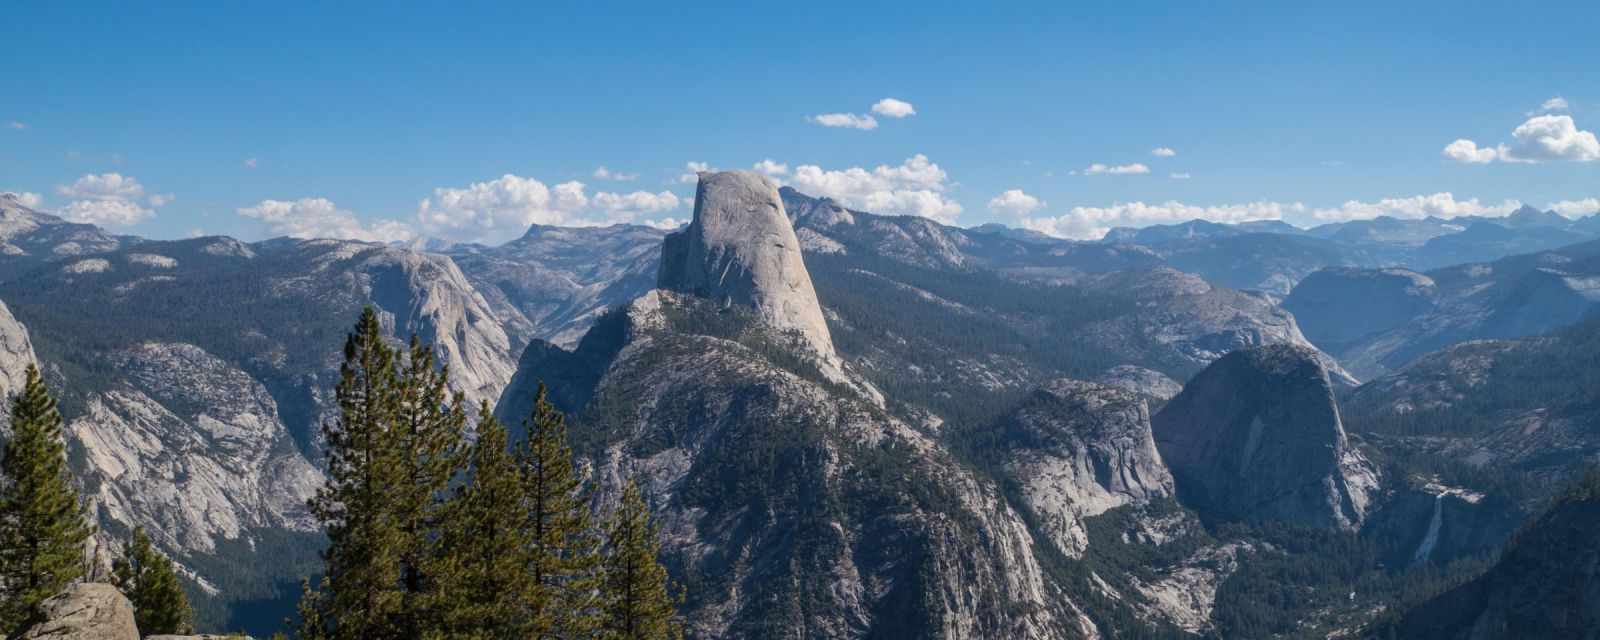 View to the Yosemite Valley, Waterfalls and Half Dome